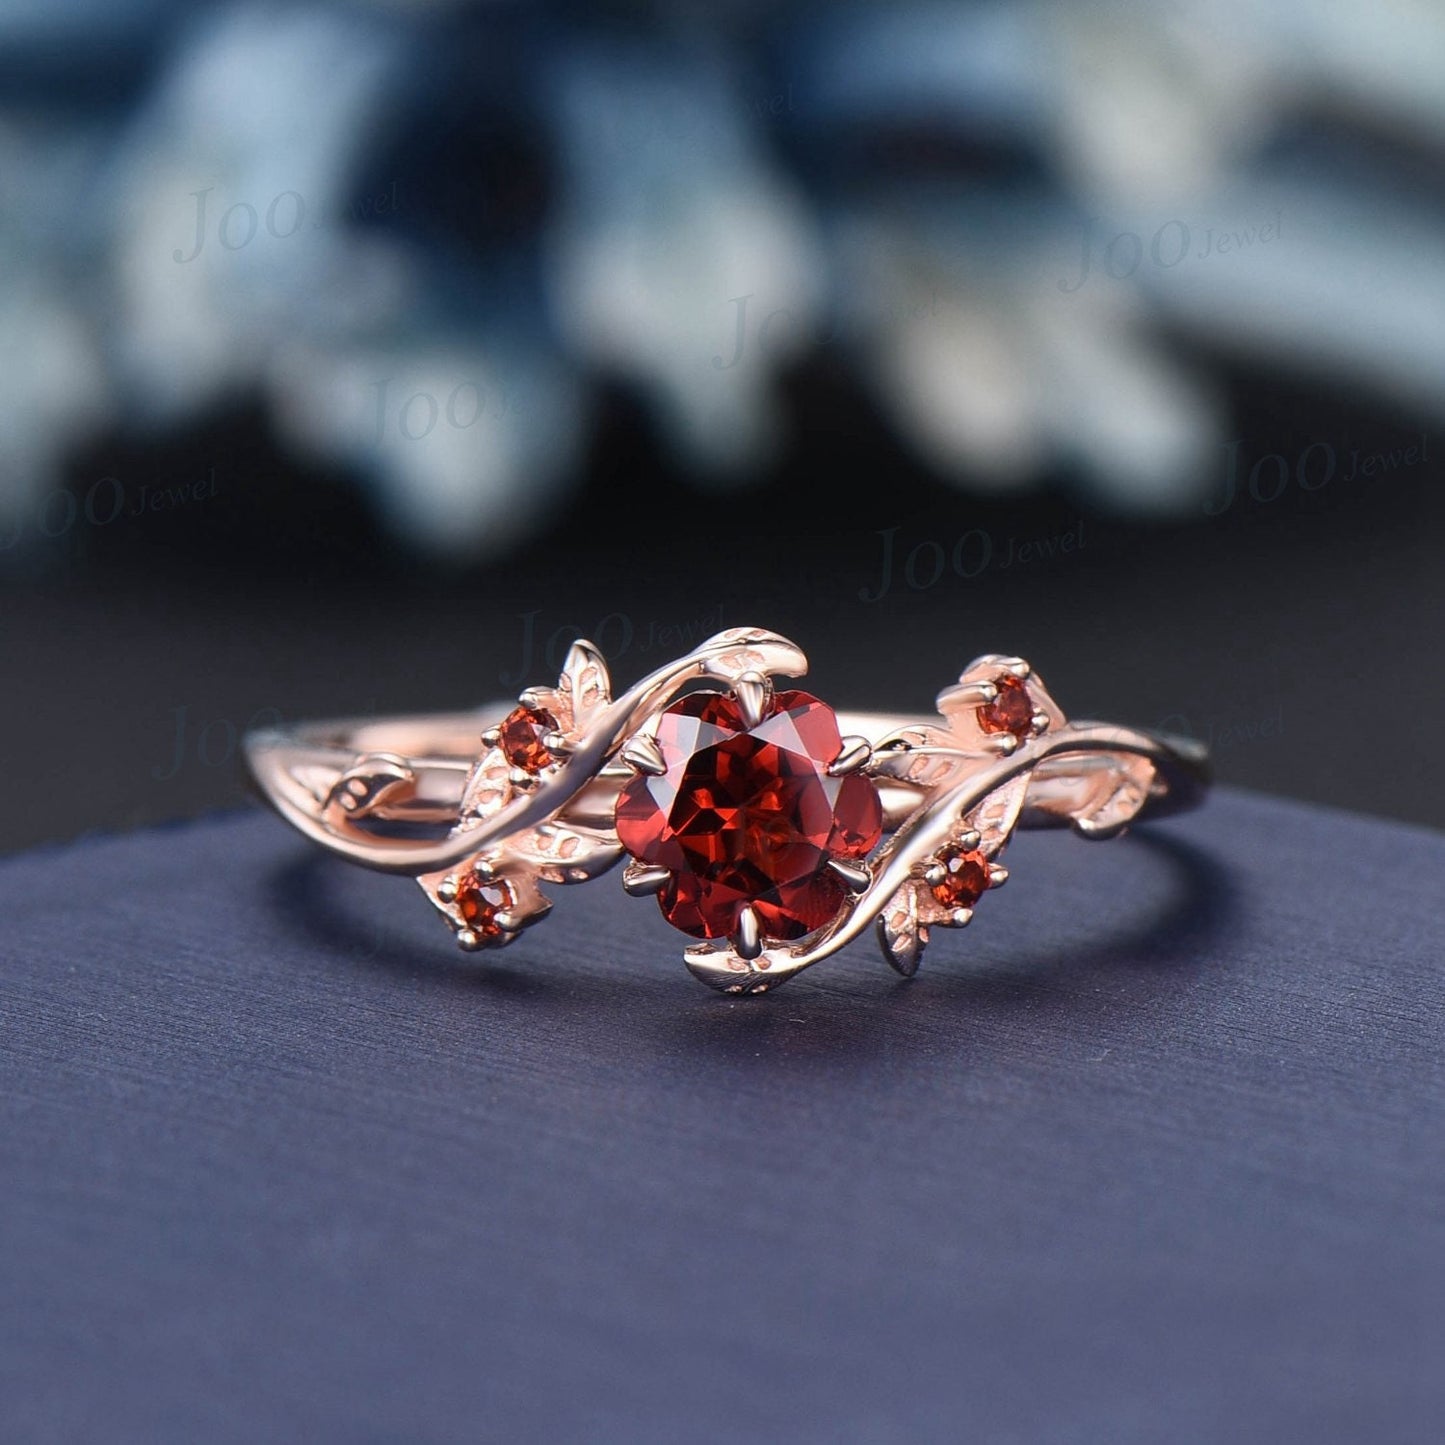 Rose Cut Natural Red Garnet Jewelry 10K Rose Gold Nature Inspired Twig Leaf Garnet Engagement Ring January Birthstone Valentine's Day Gifts